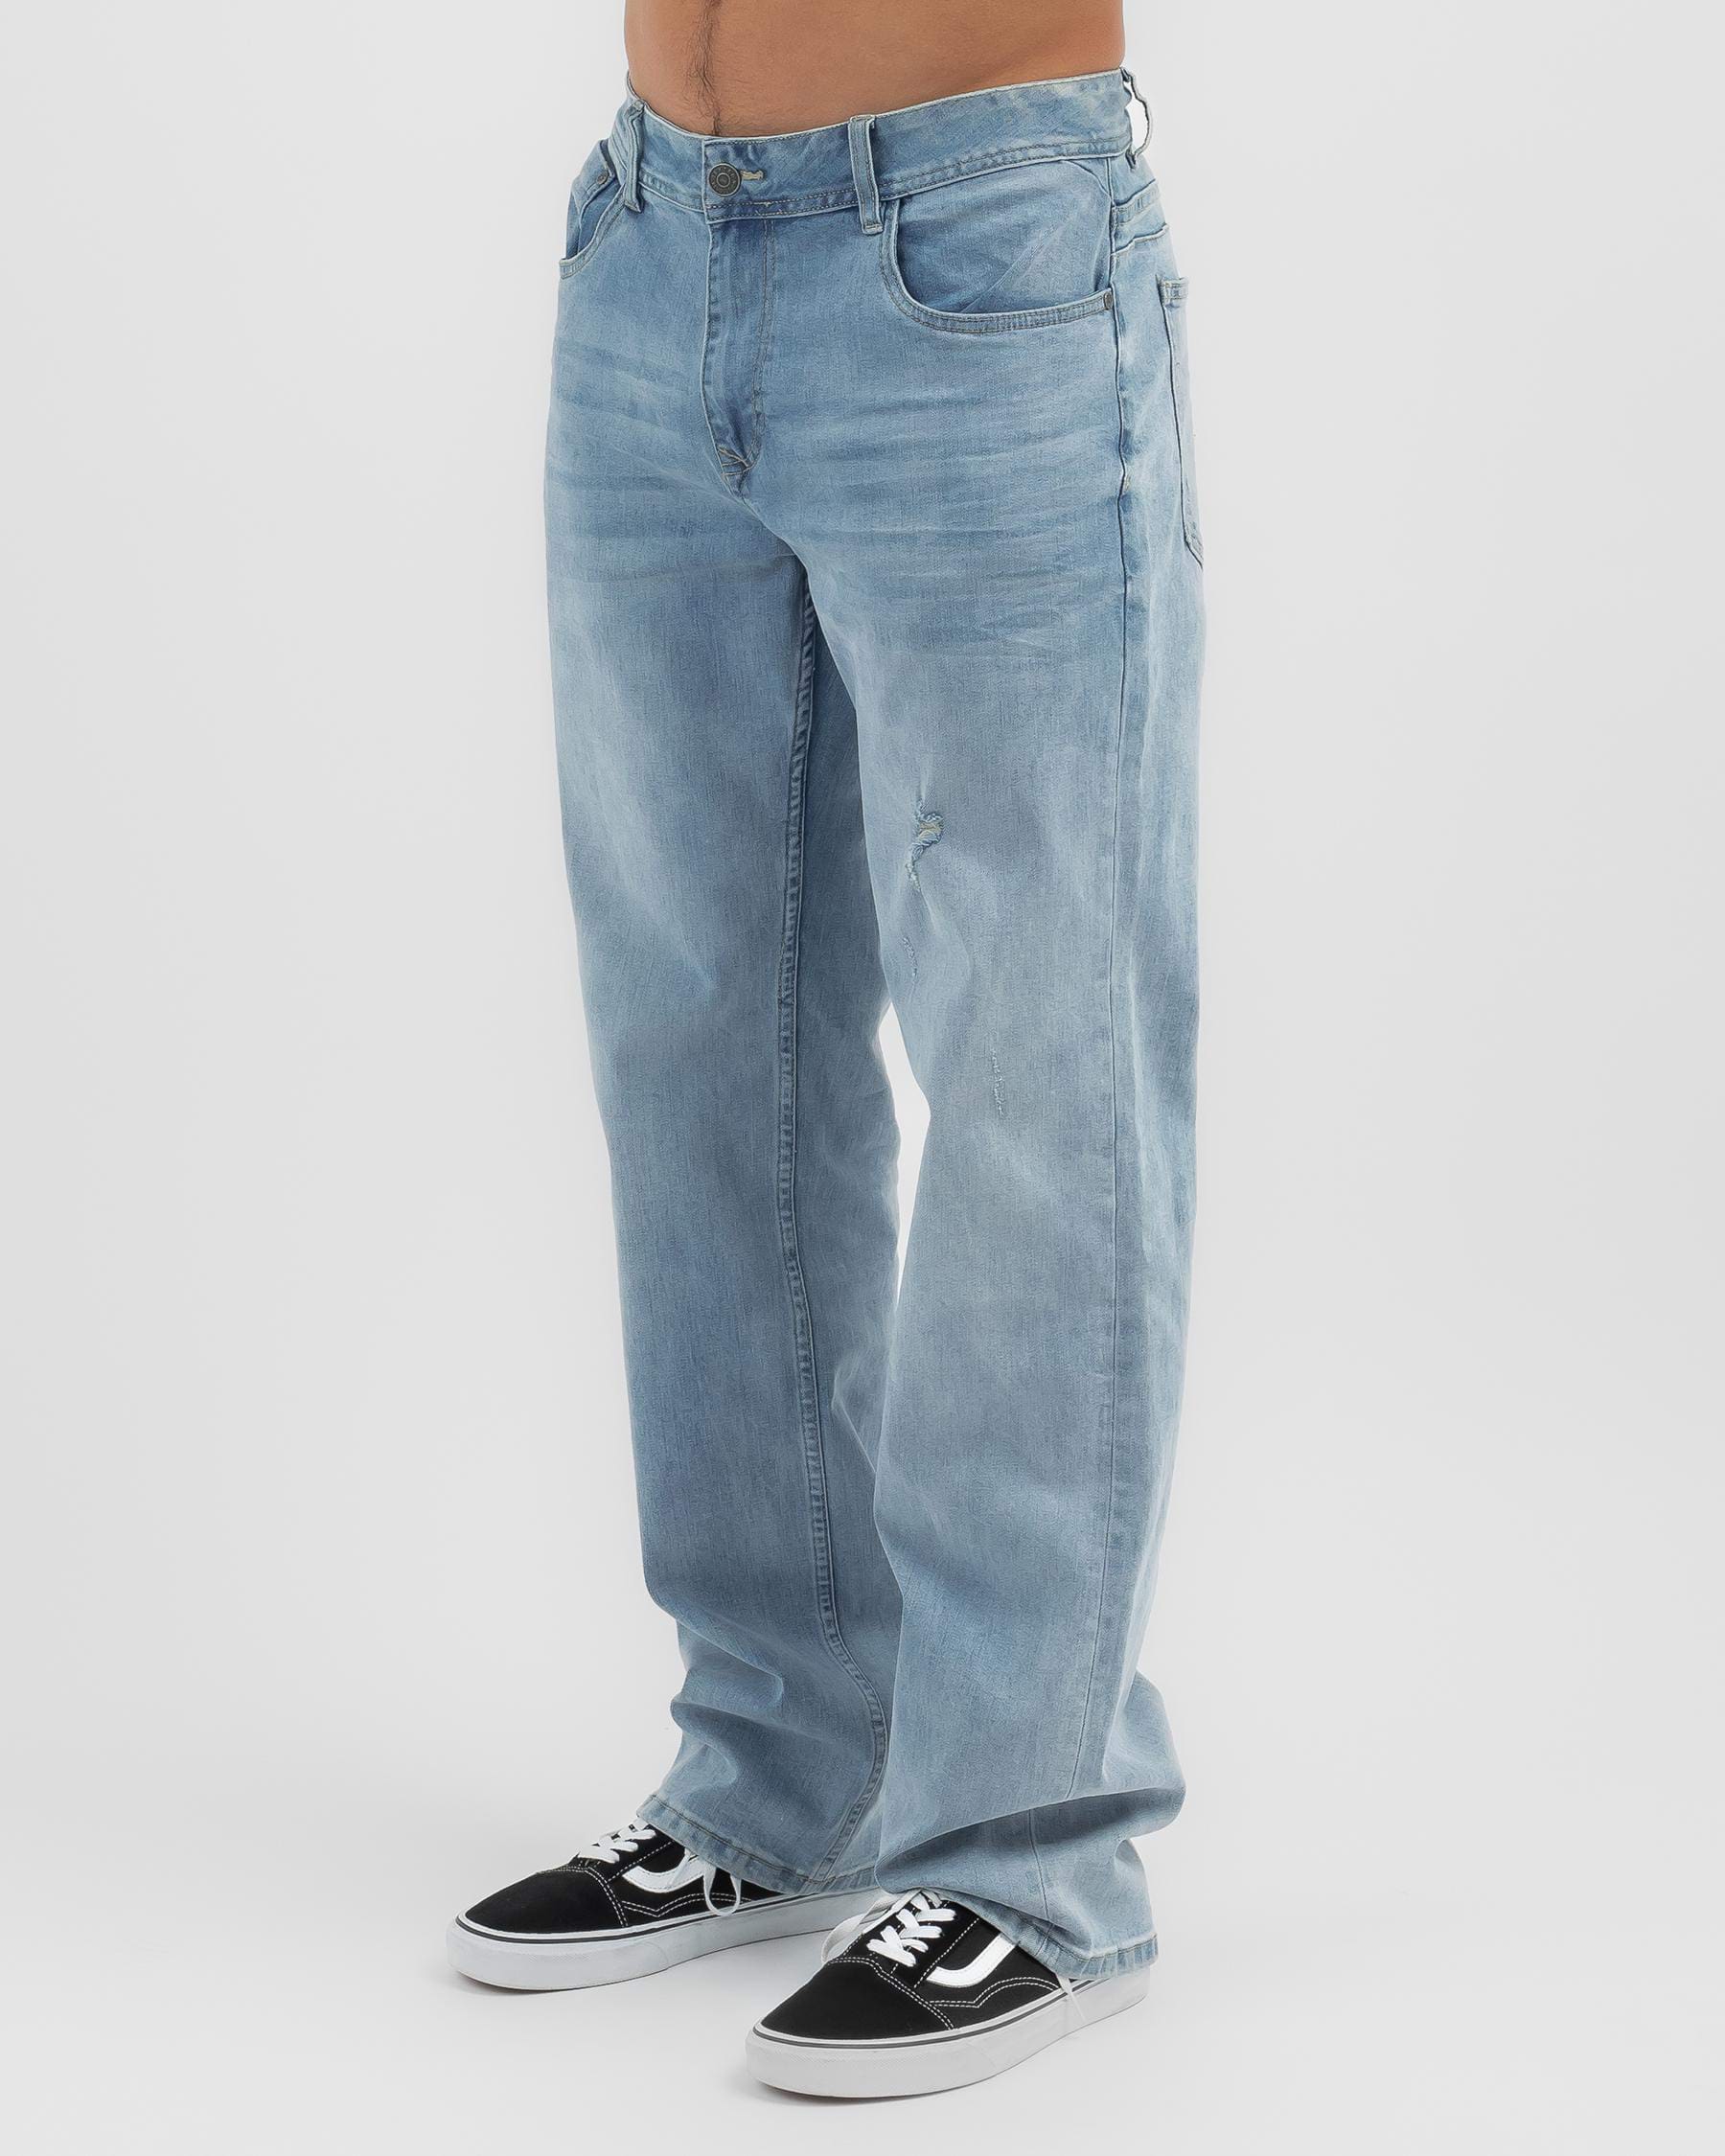 Dexter Impact Jeans In Light Blue - Fast Shipping & Easy Returns - City ...